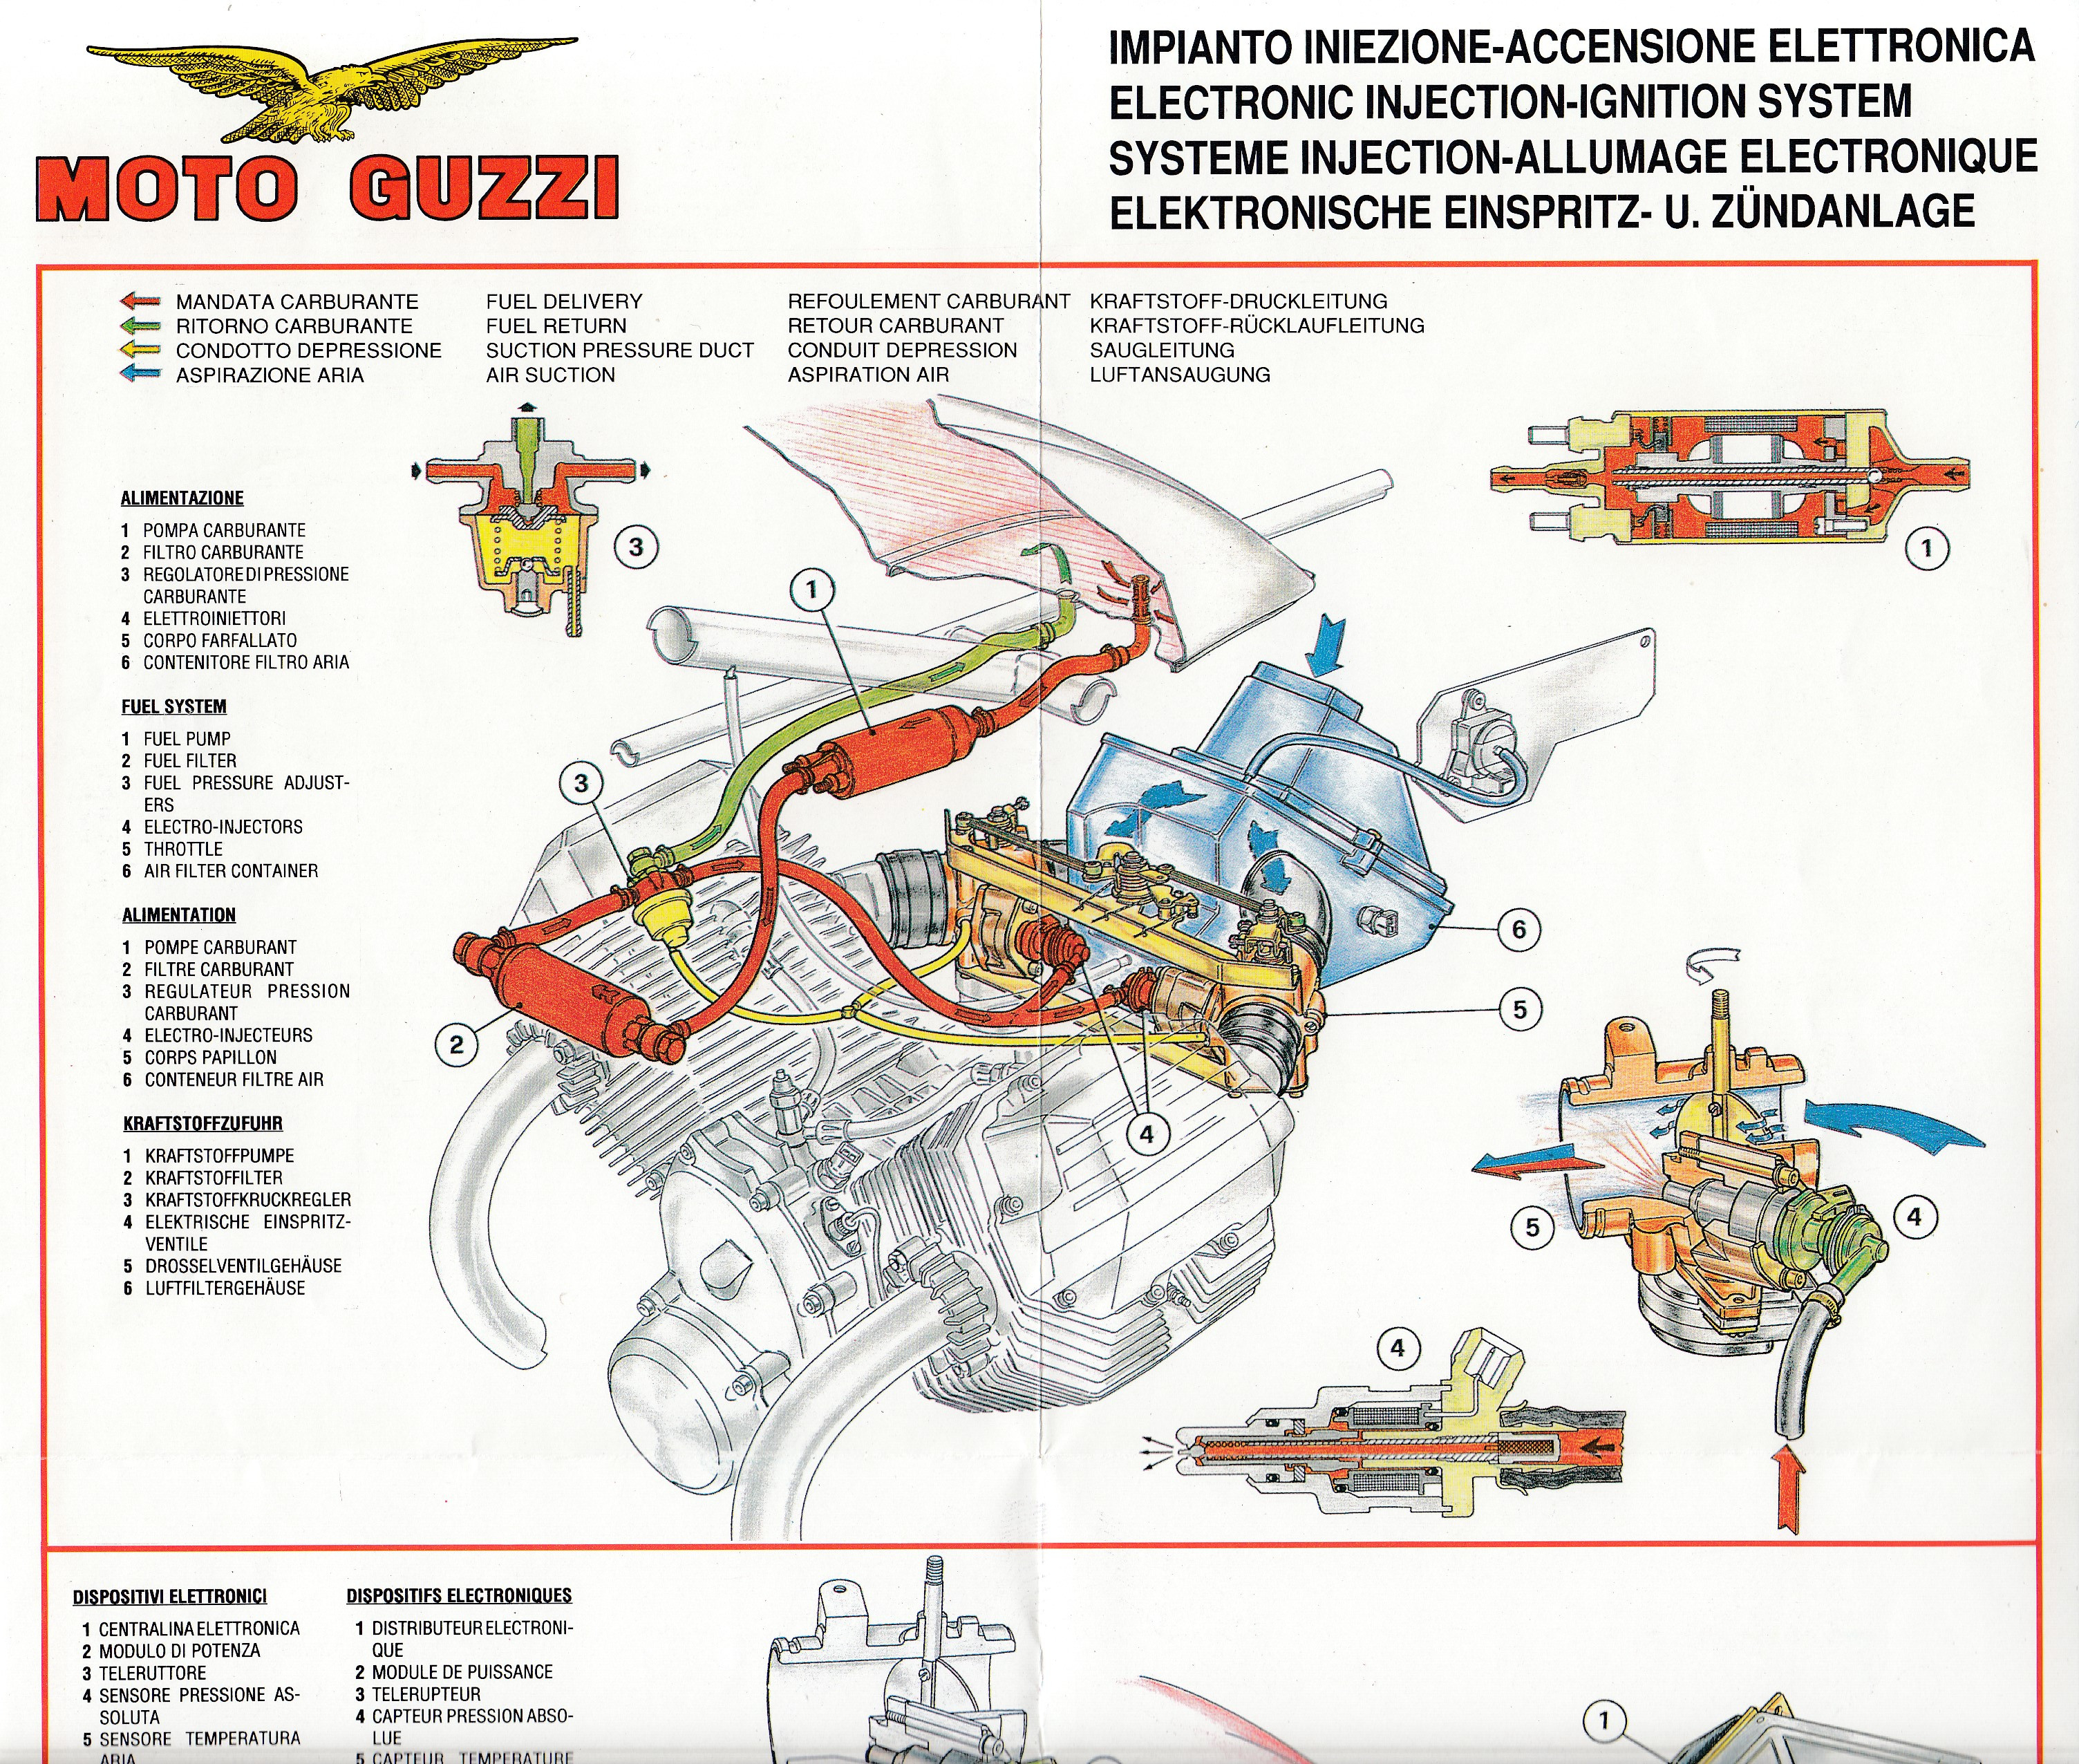 Brochure - Moto Guzzi electronic injection and ignition system